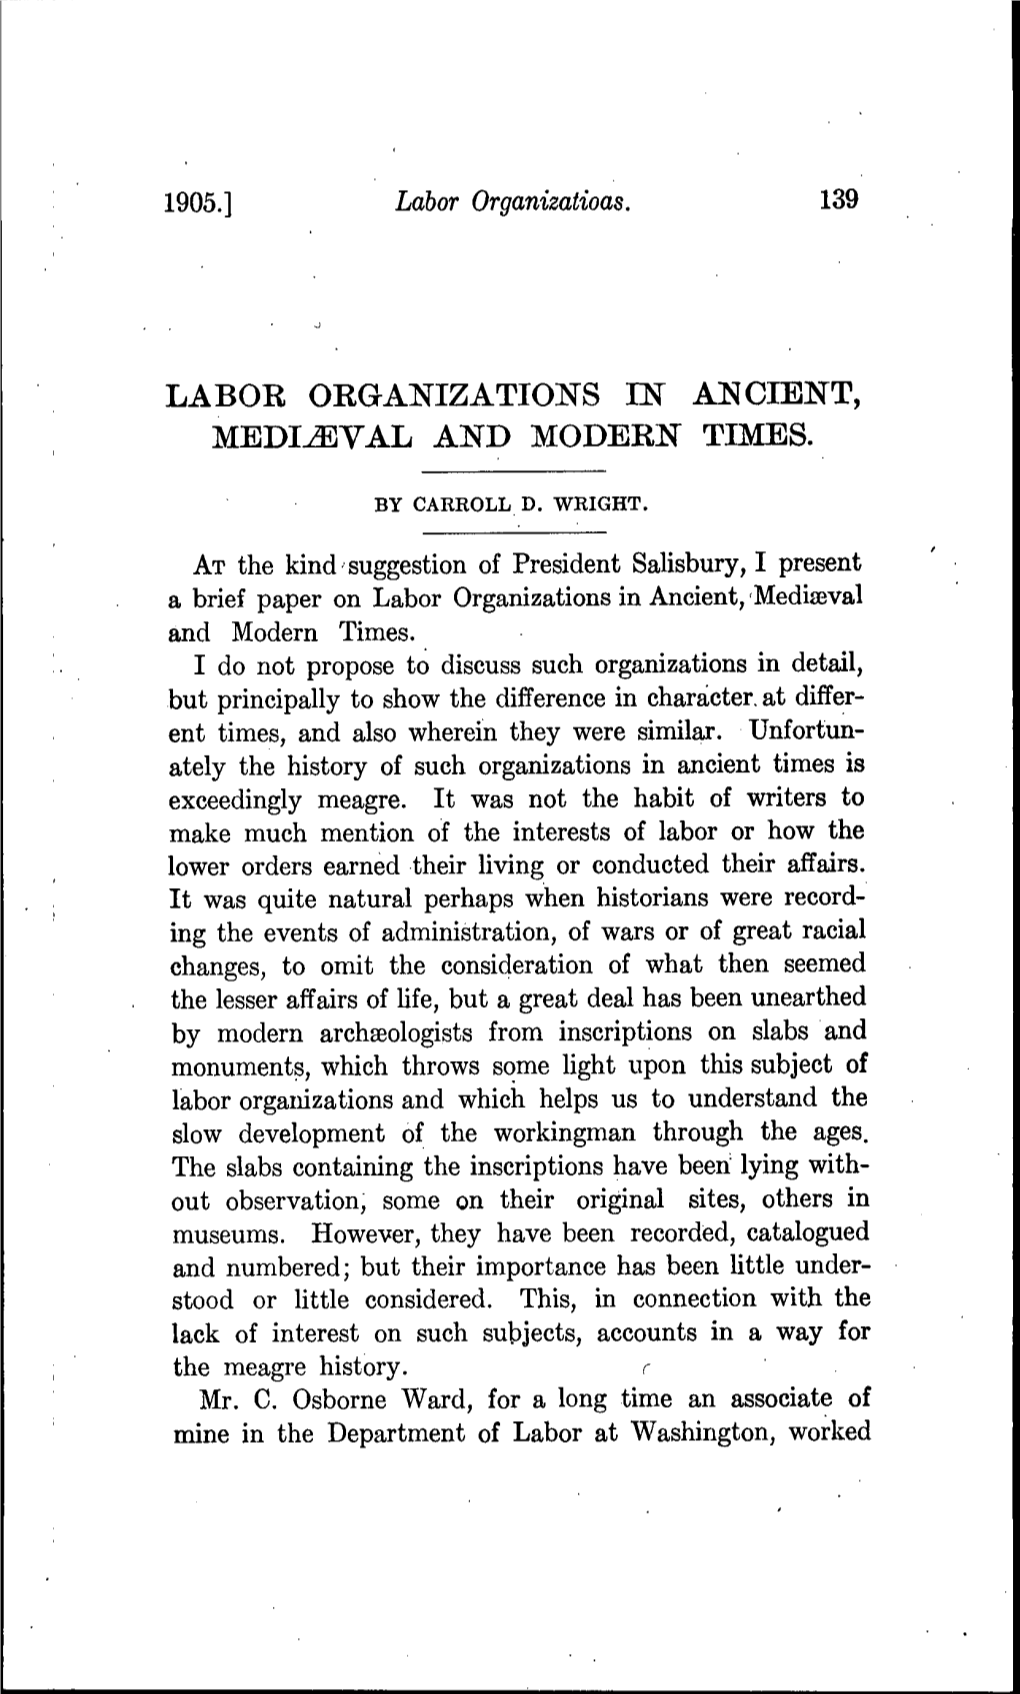 Labor Organizations in Ancient, Medieval and Modern Times